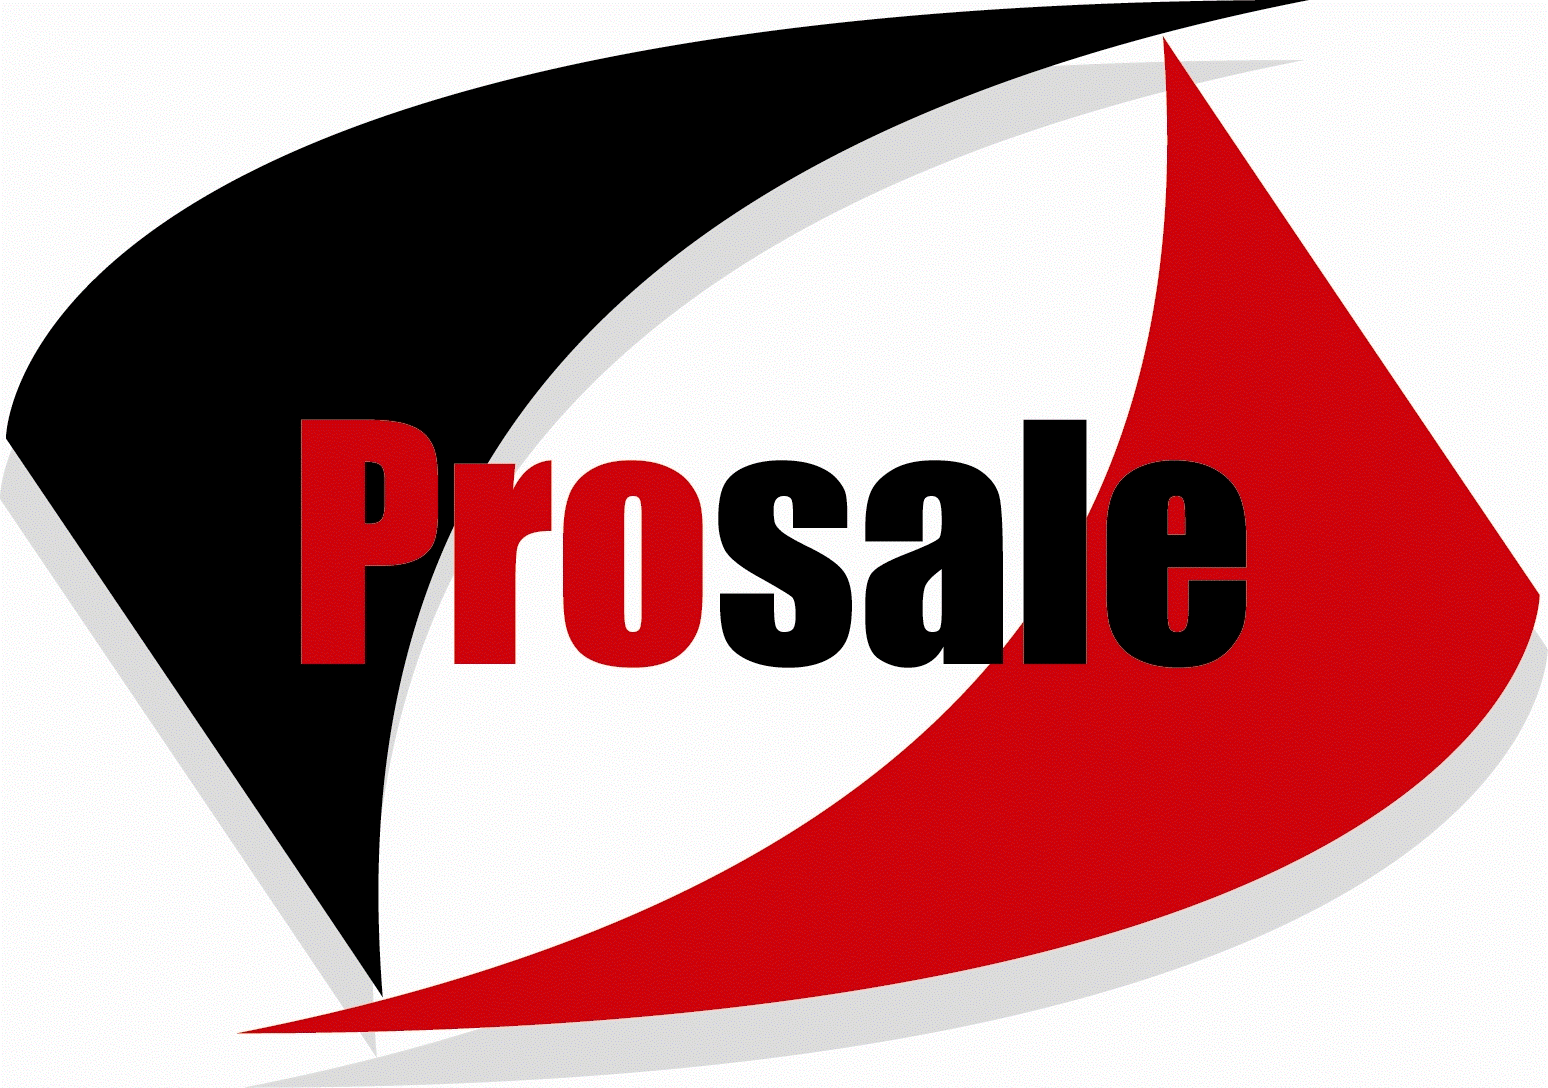 Automatic Doors by Prosale Limited